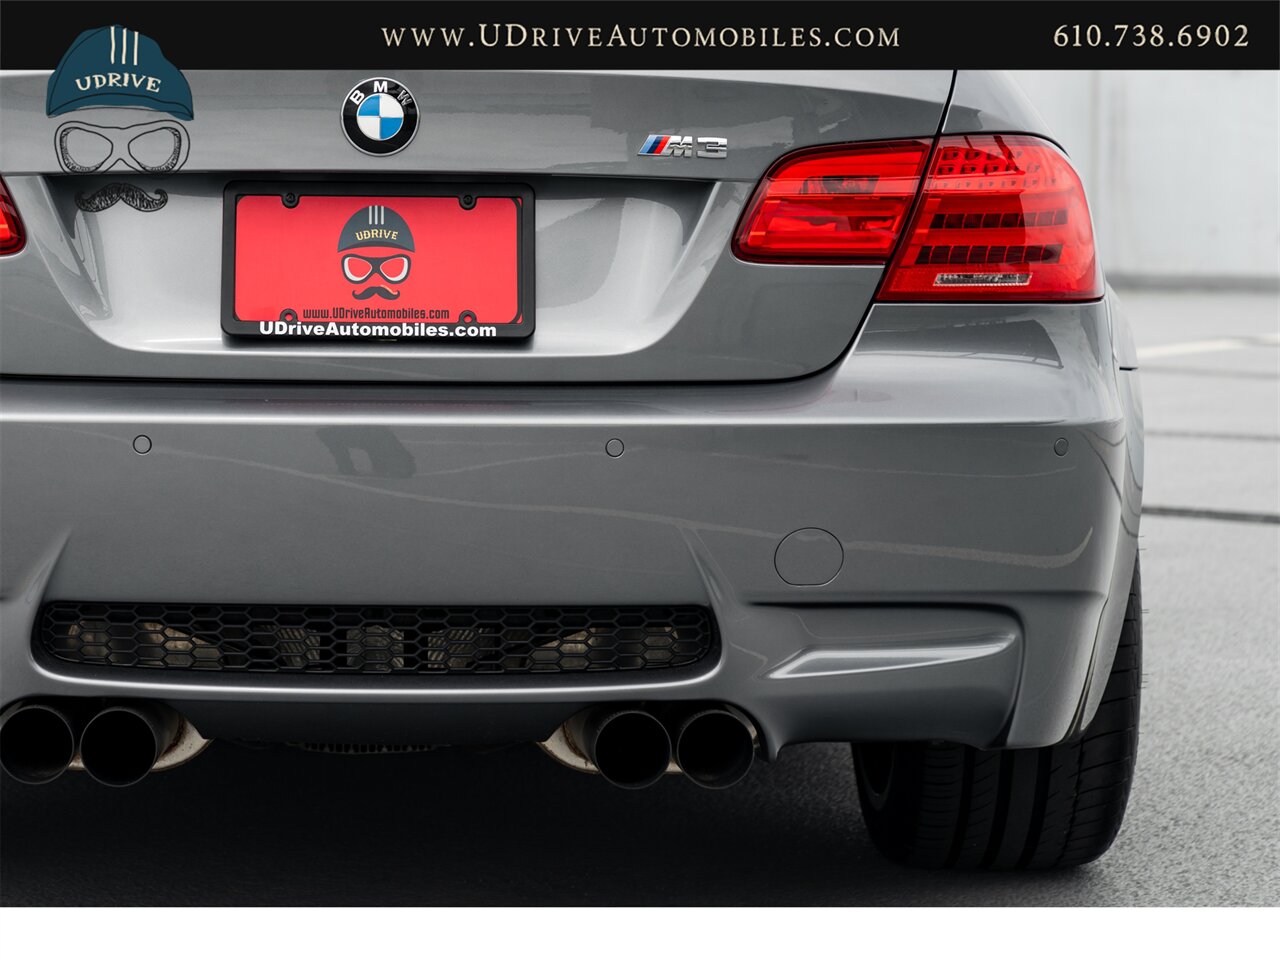 2012 BMW M3 E92 6 Speed 7k Miles Dinan Upgrades  GTS/359 Wheels Carbon Fiber Roof - Photo 19 - West Chester, PA 19382